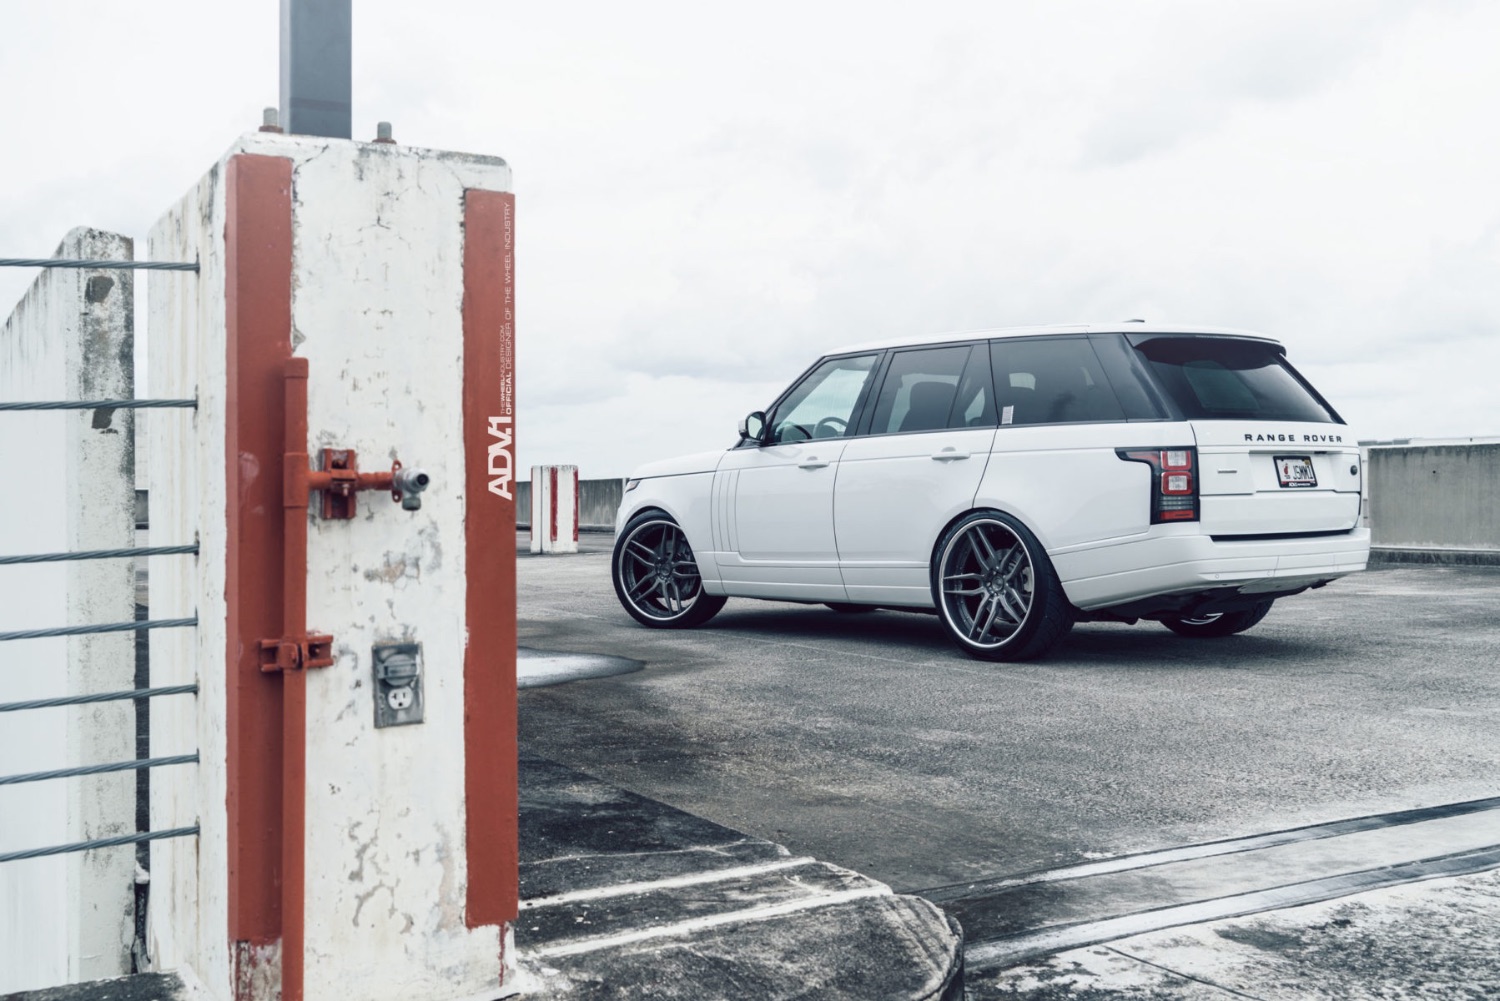 adv1-wheels-range-roverLand-Rover-white-hse-lowered-modified-deep-concave-aftermarket-24-inch-rims-K